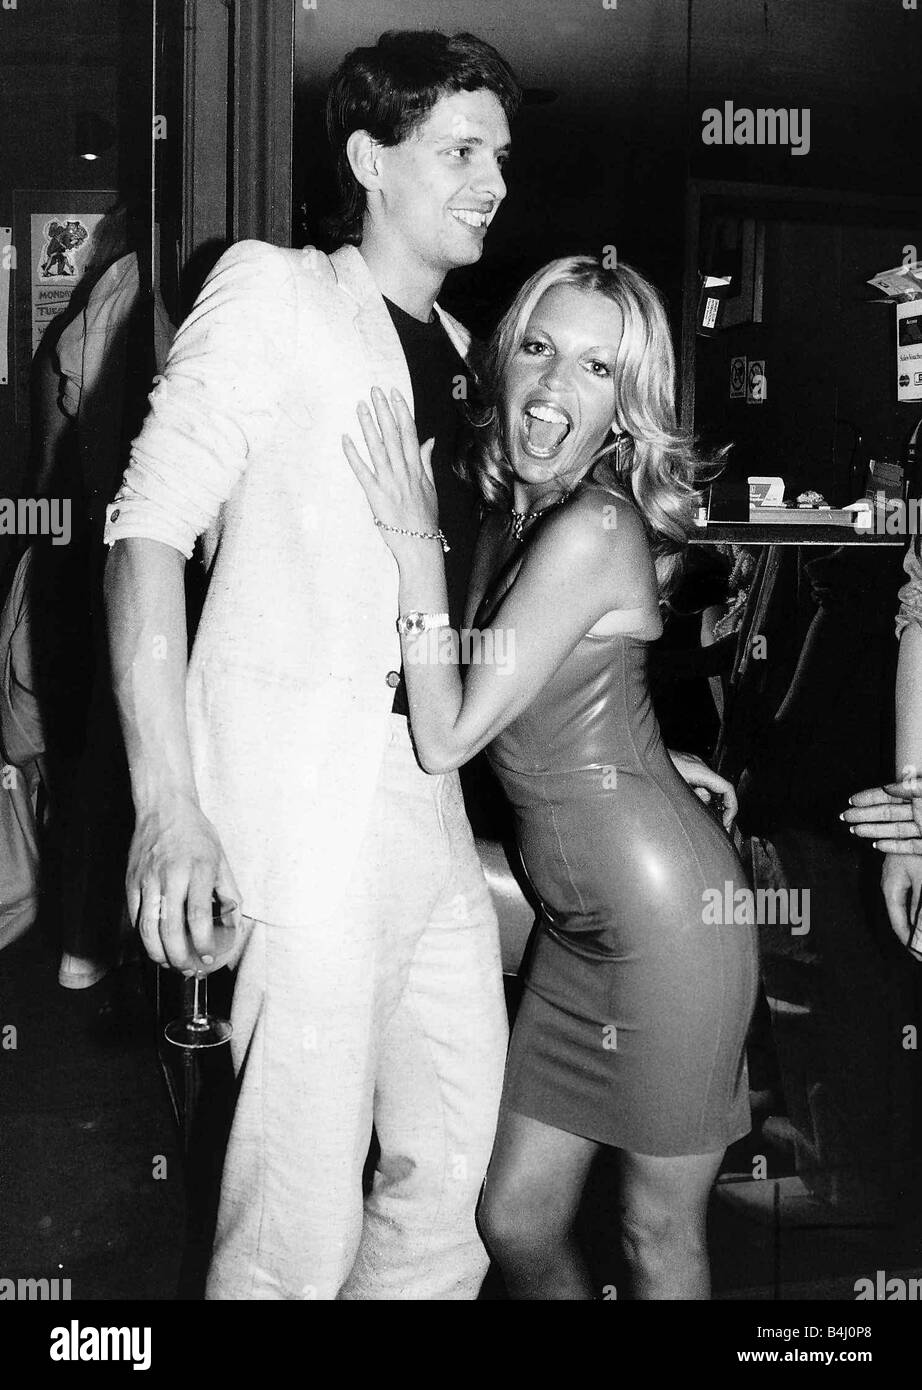 sally-thomsett-actress-stars-in-man-about-the-house-dances-with-boyfriend-B4J0P8.jpg